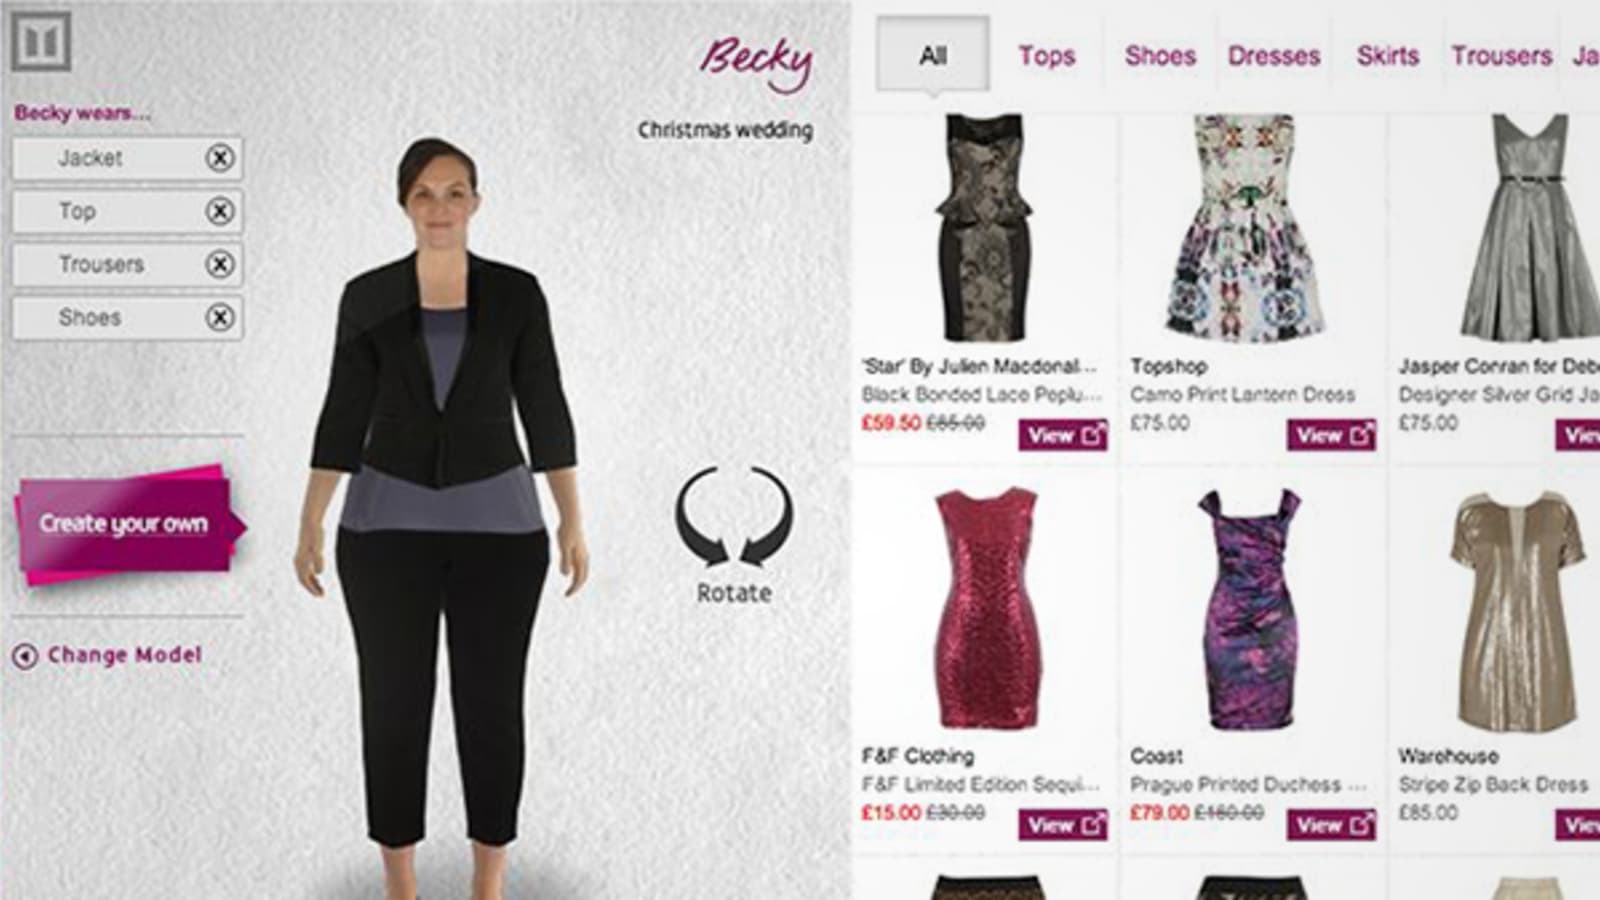 How Online Shopping Is Changing The Way People Buy Clothes